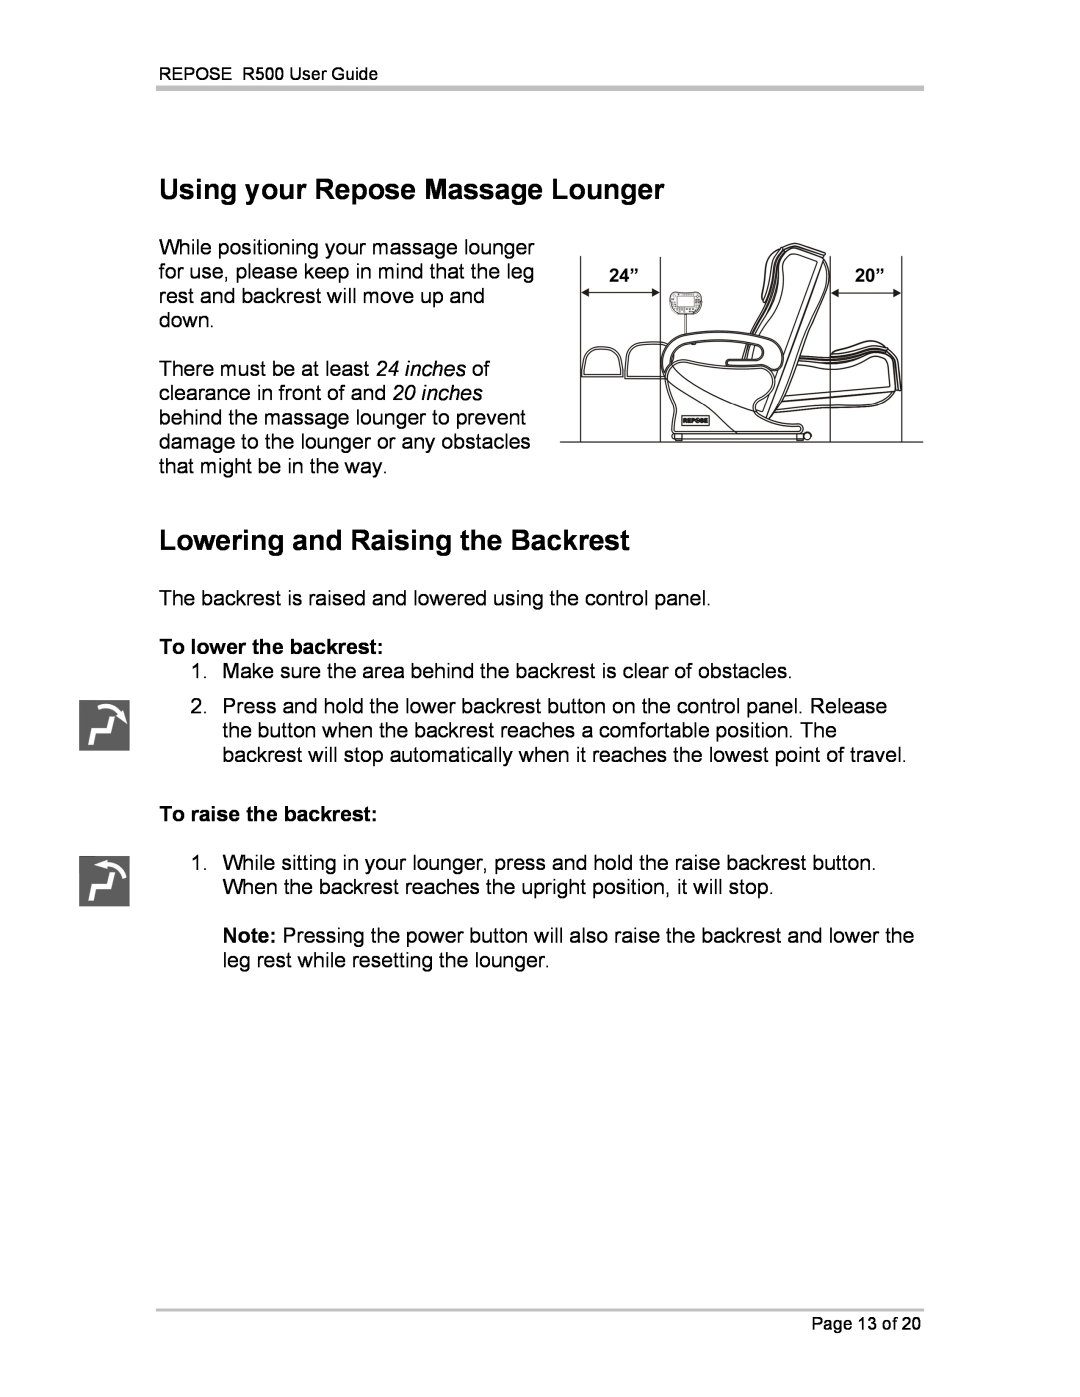 Repose R500 manual Using your Repose Massage Lounger, Lowering and Raising the Backrest, To lower the backrest 